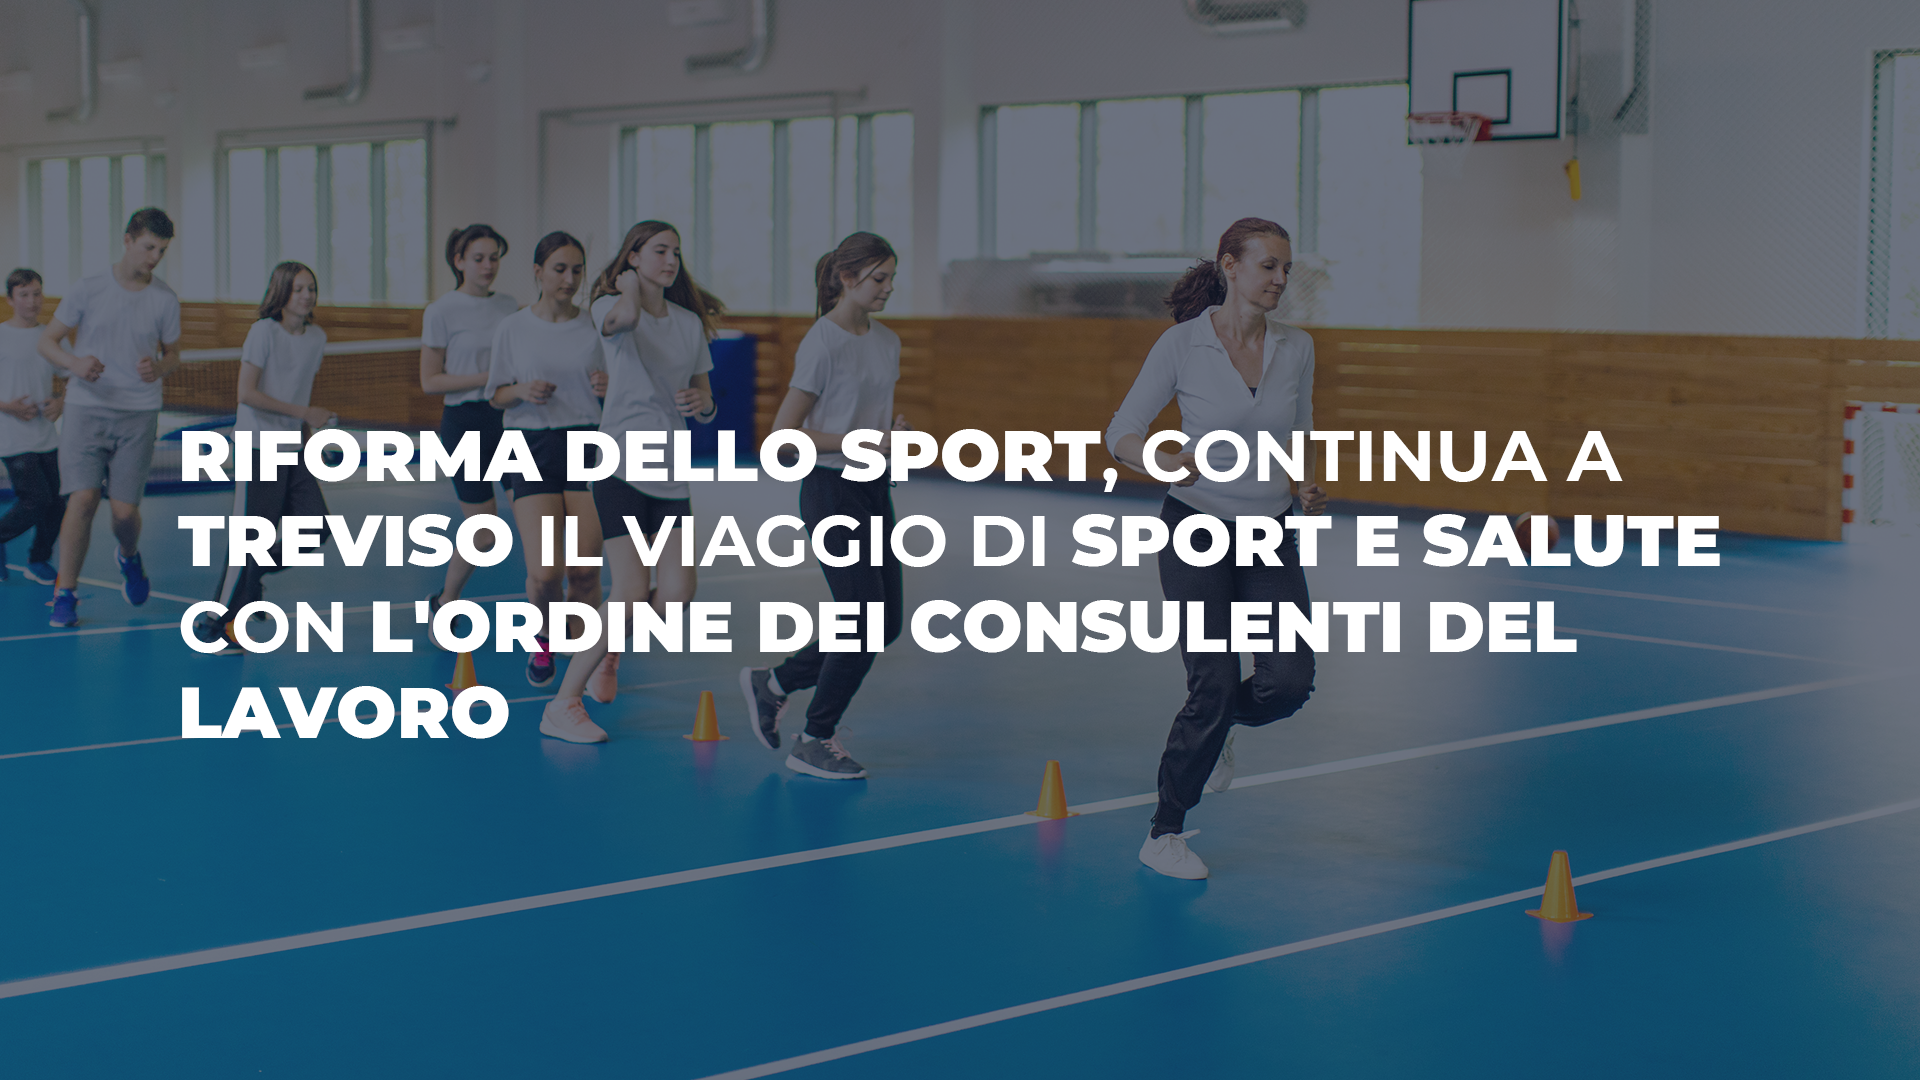 Tomorrow the Sport and Health trip will stop in Treviso together with the National Order of Labor Consultants to inform on the topic of sport reform